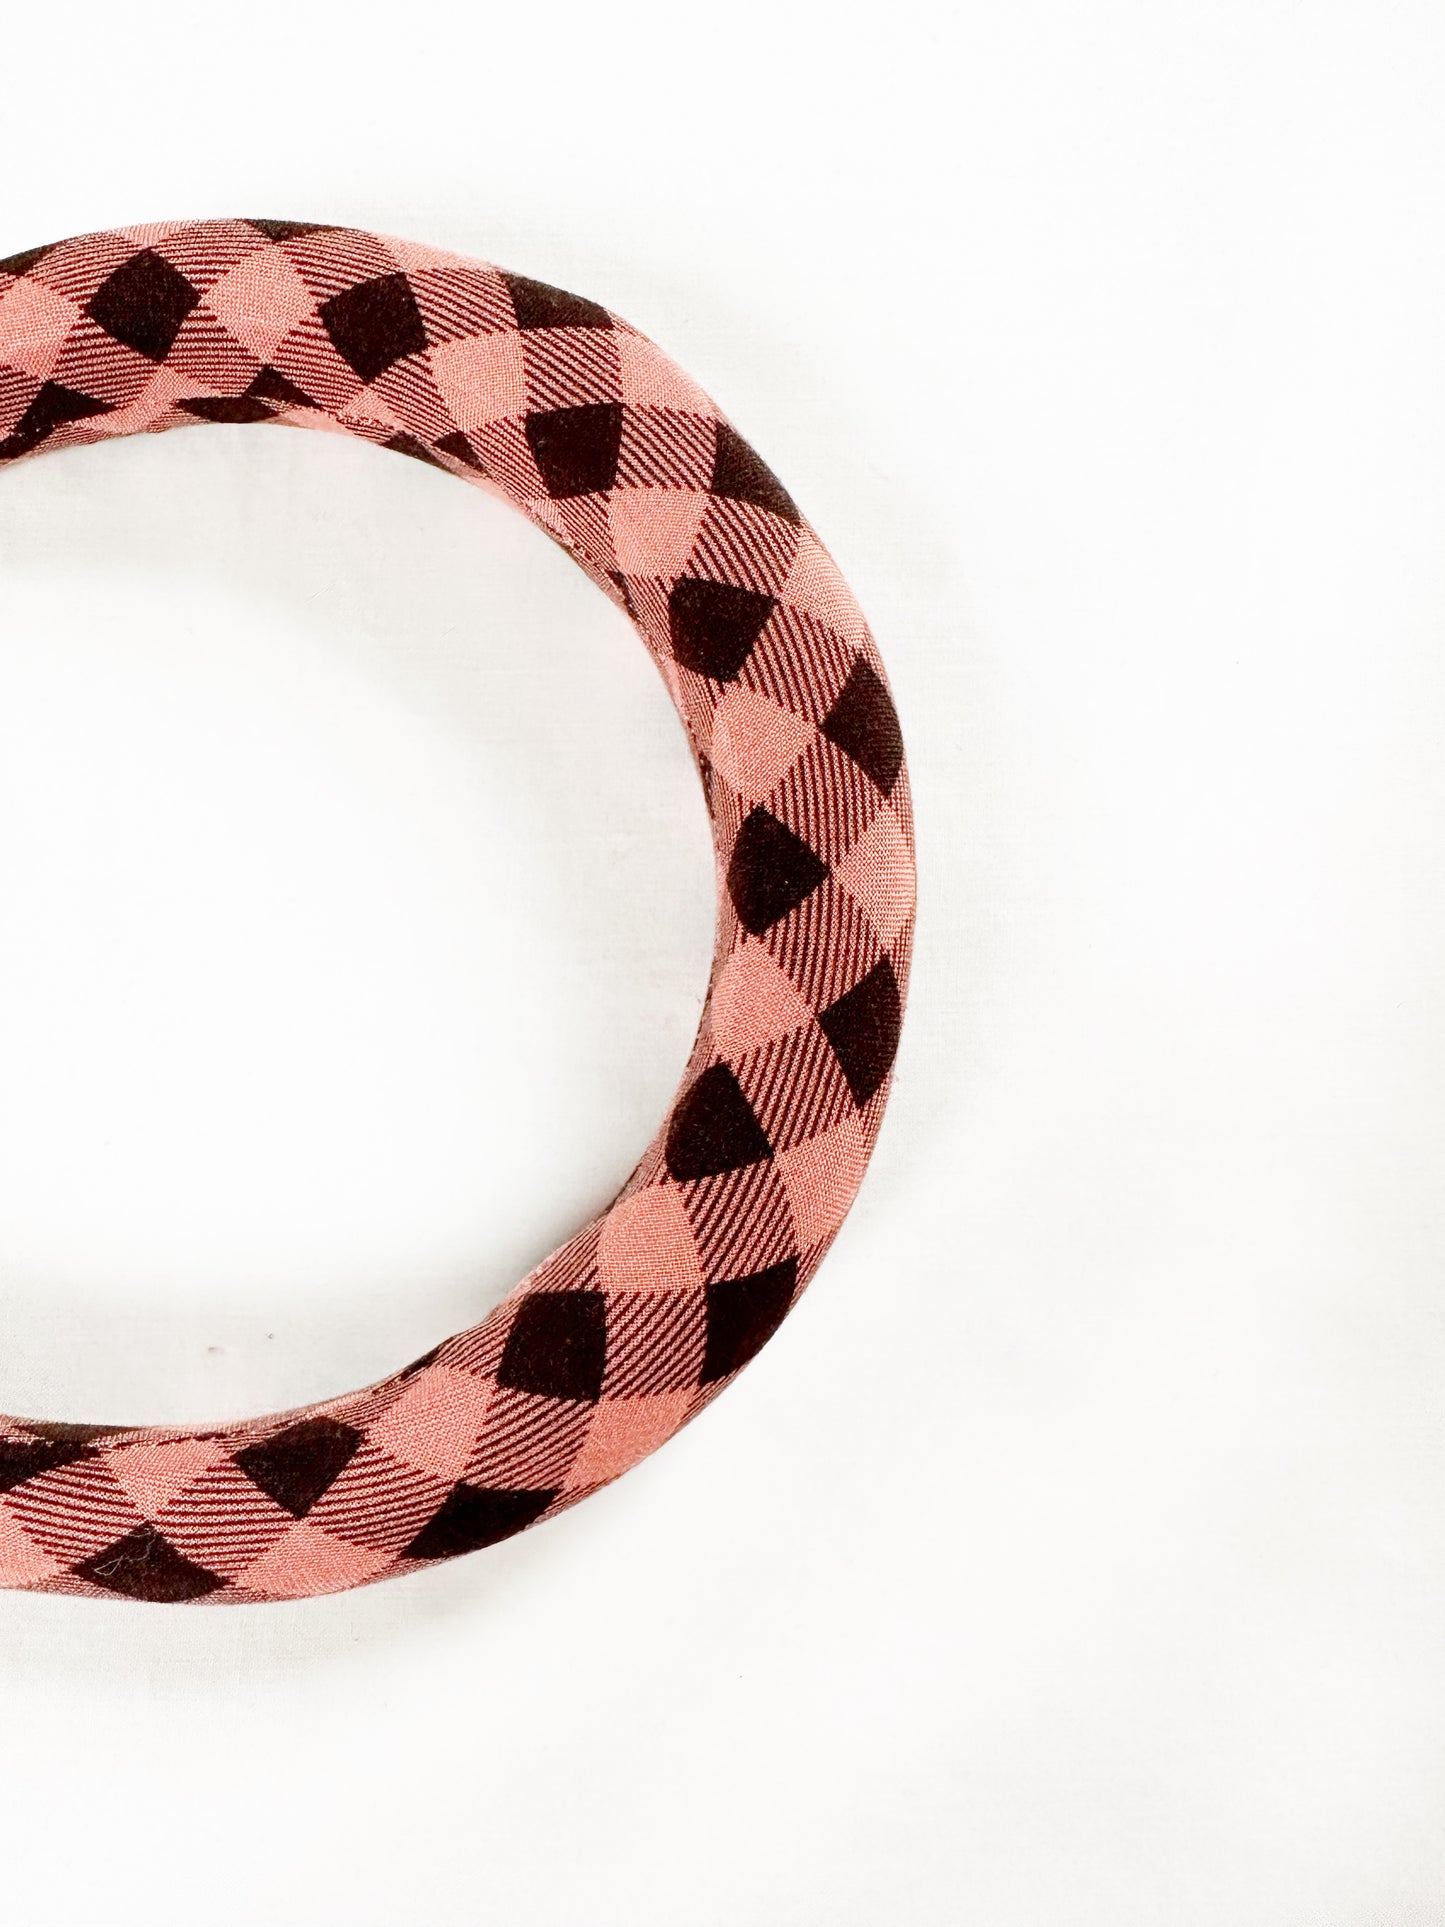 Padded Headband in pink and brown gingham